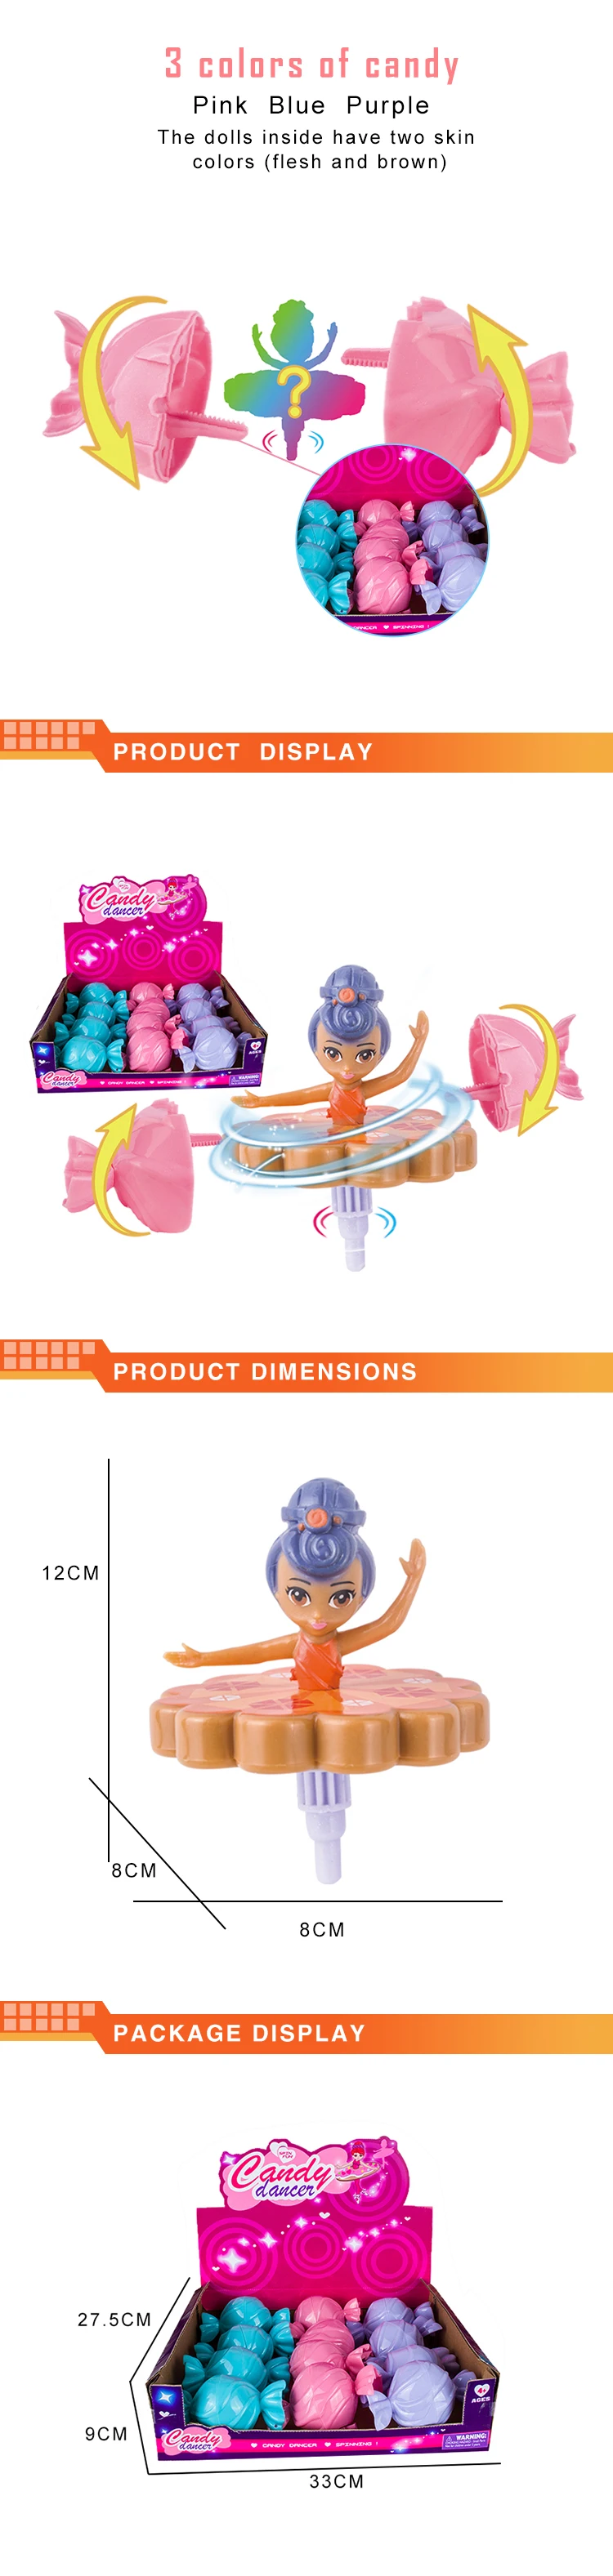 2020 New Arrival Plastic Candy Spiral Rotating Dancing Surprise Blind Box Candy Dancing Doll